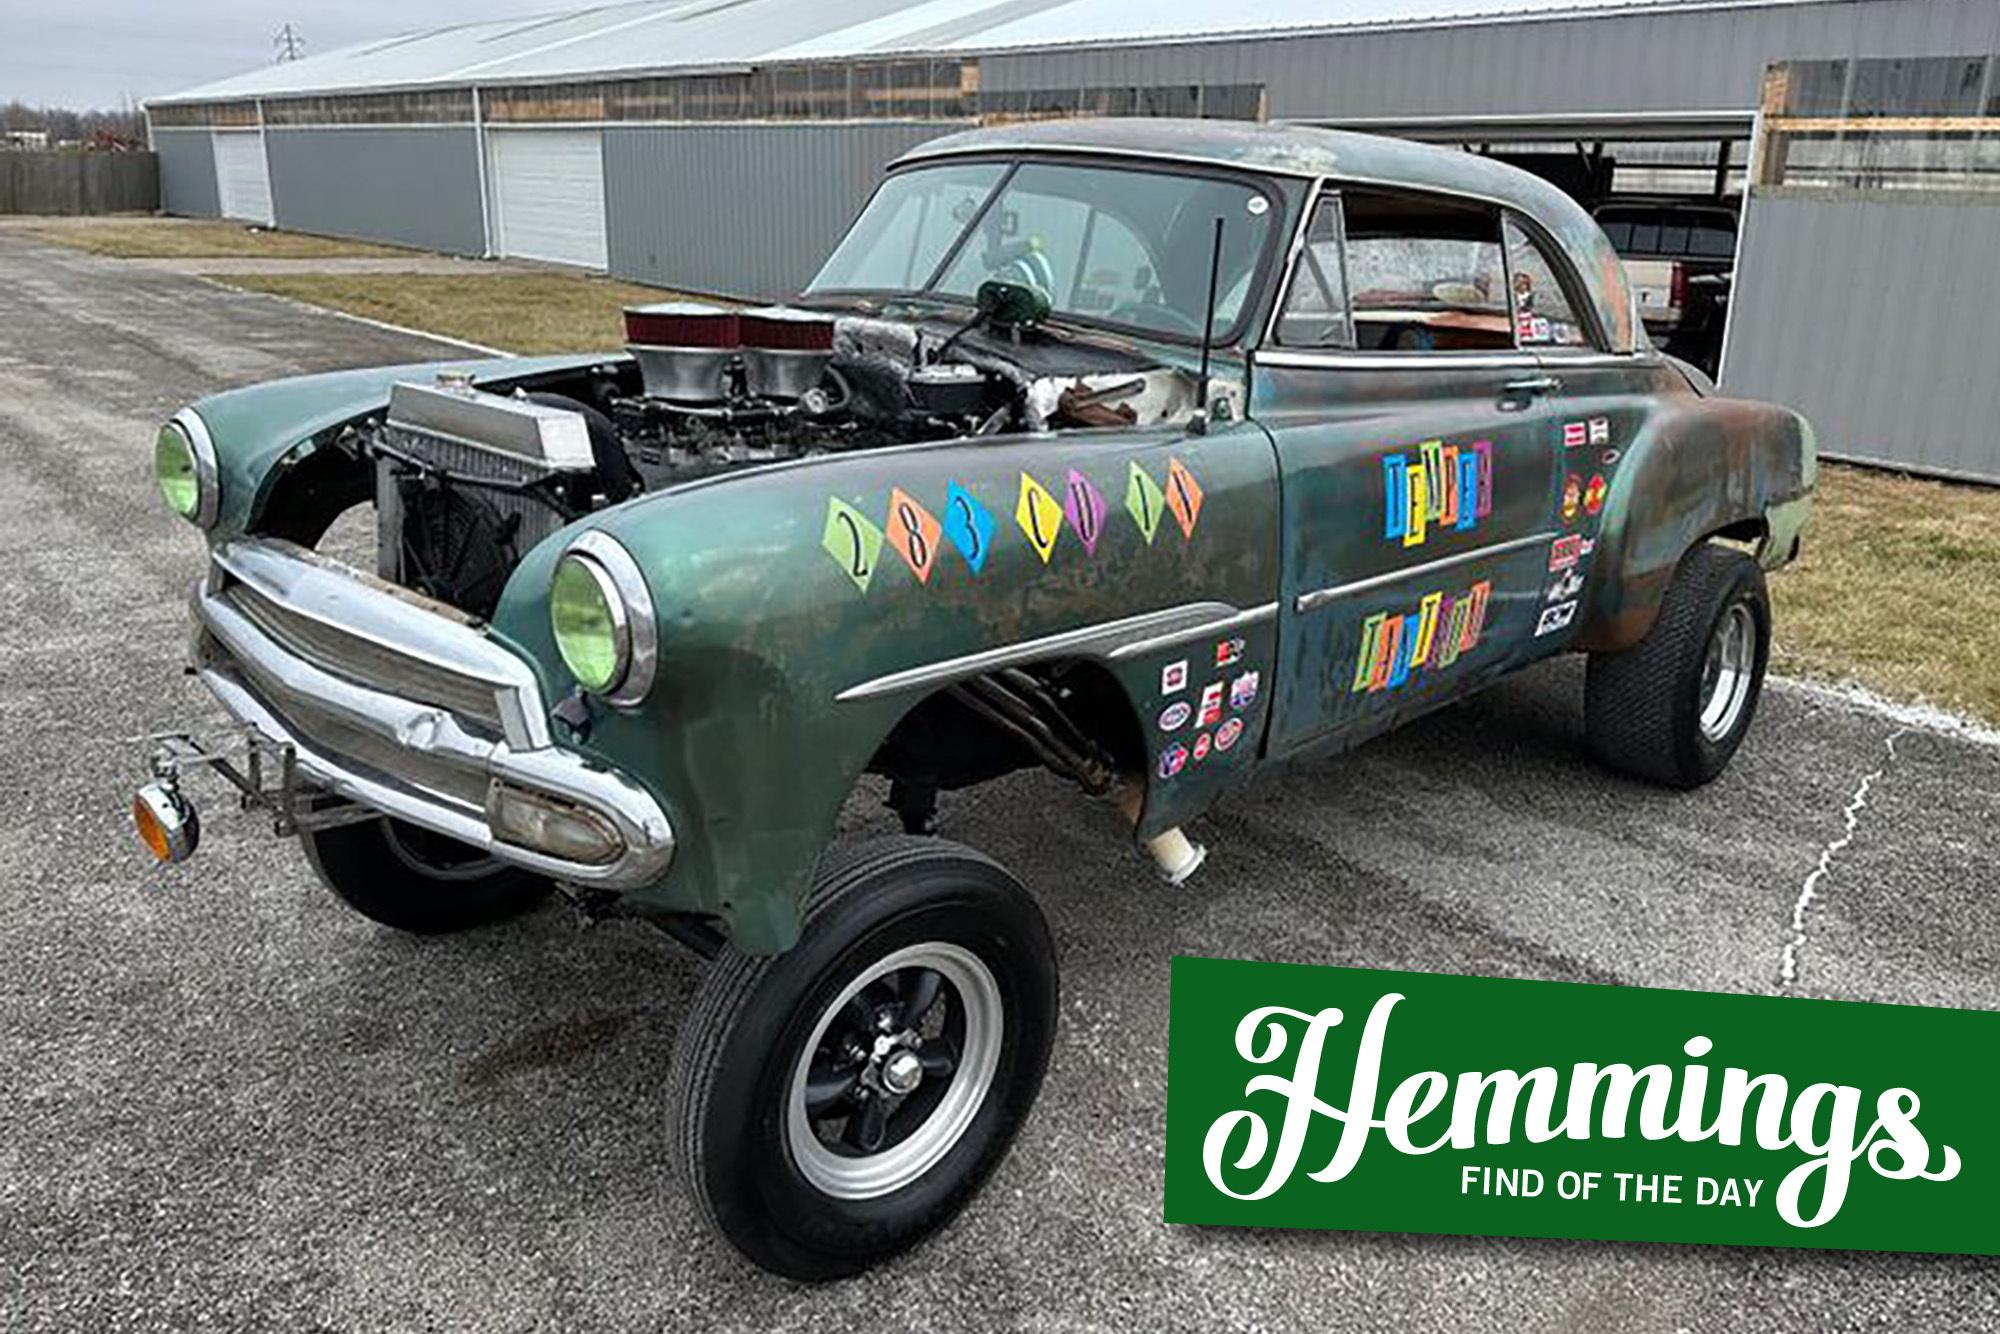 It Has the Nose-High Stance of a Gasser, but This 1951 Chevrolet Also Has Plenty of Rat Rod DNA